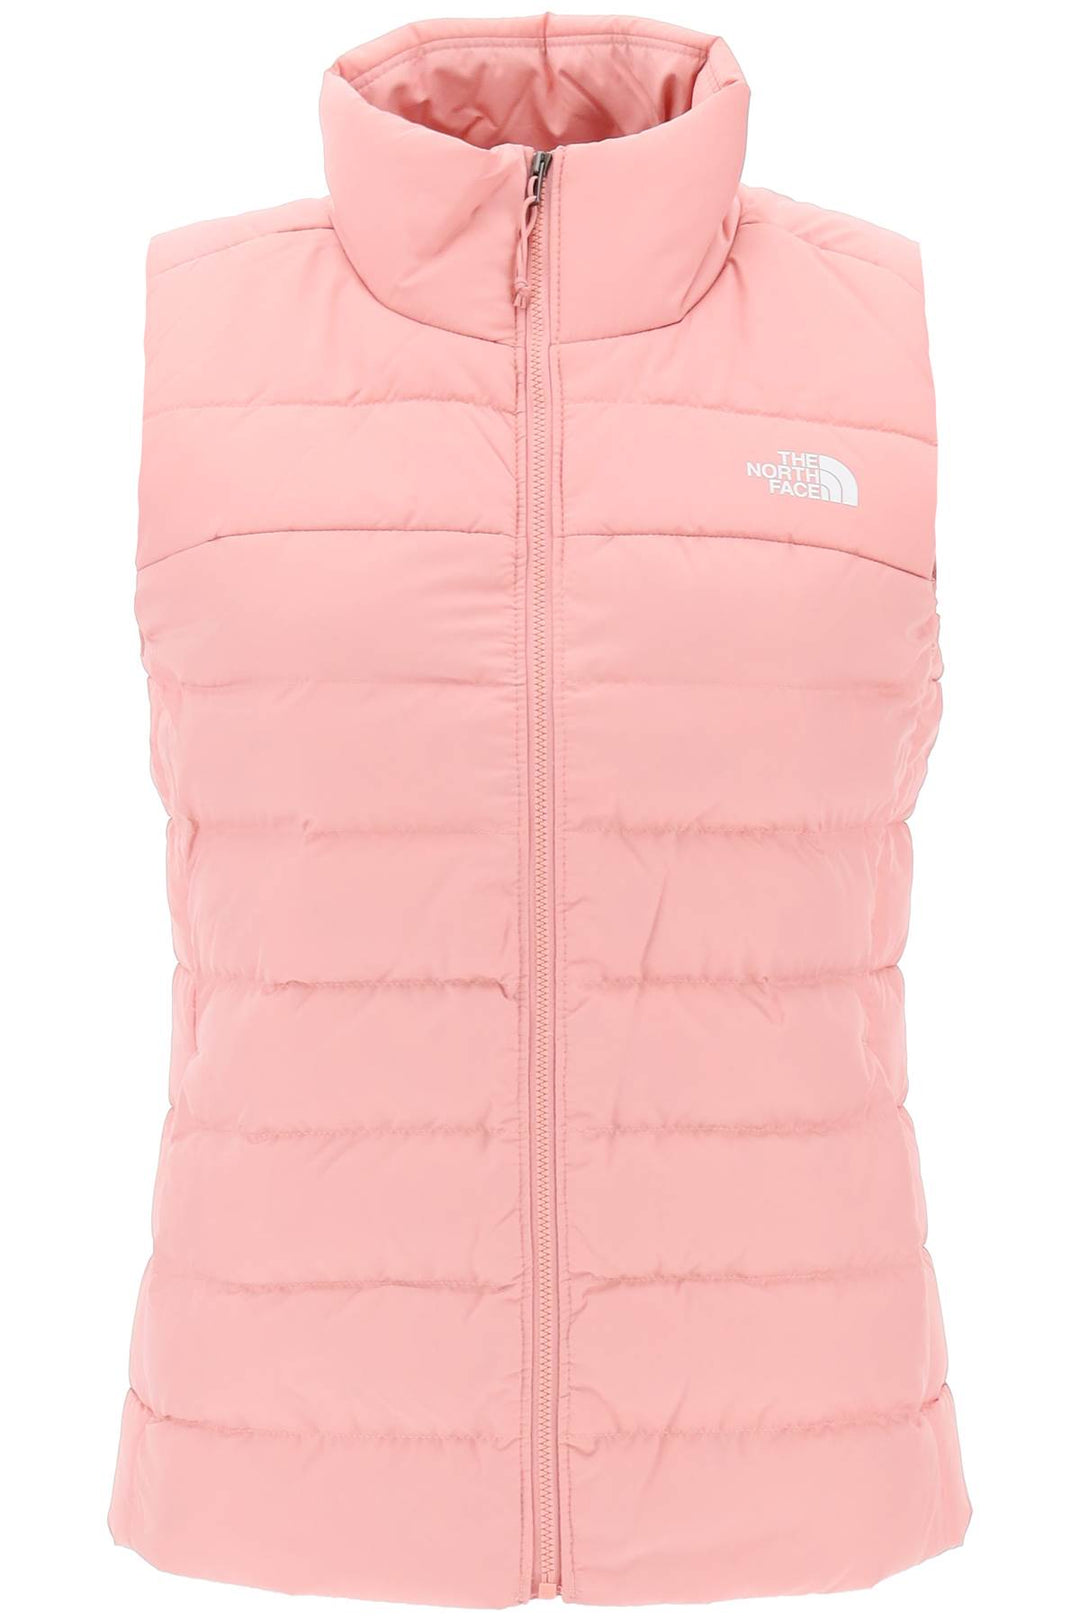 The north face akoncagua lightweight puffer vest-0